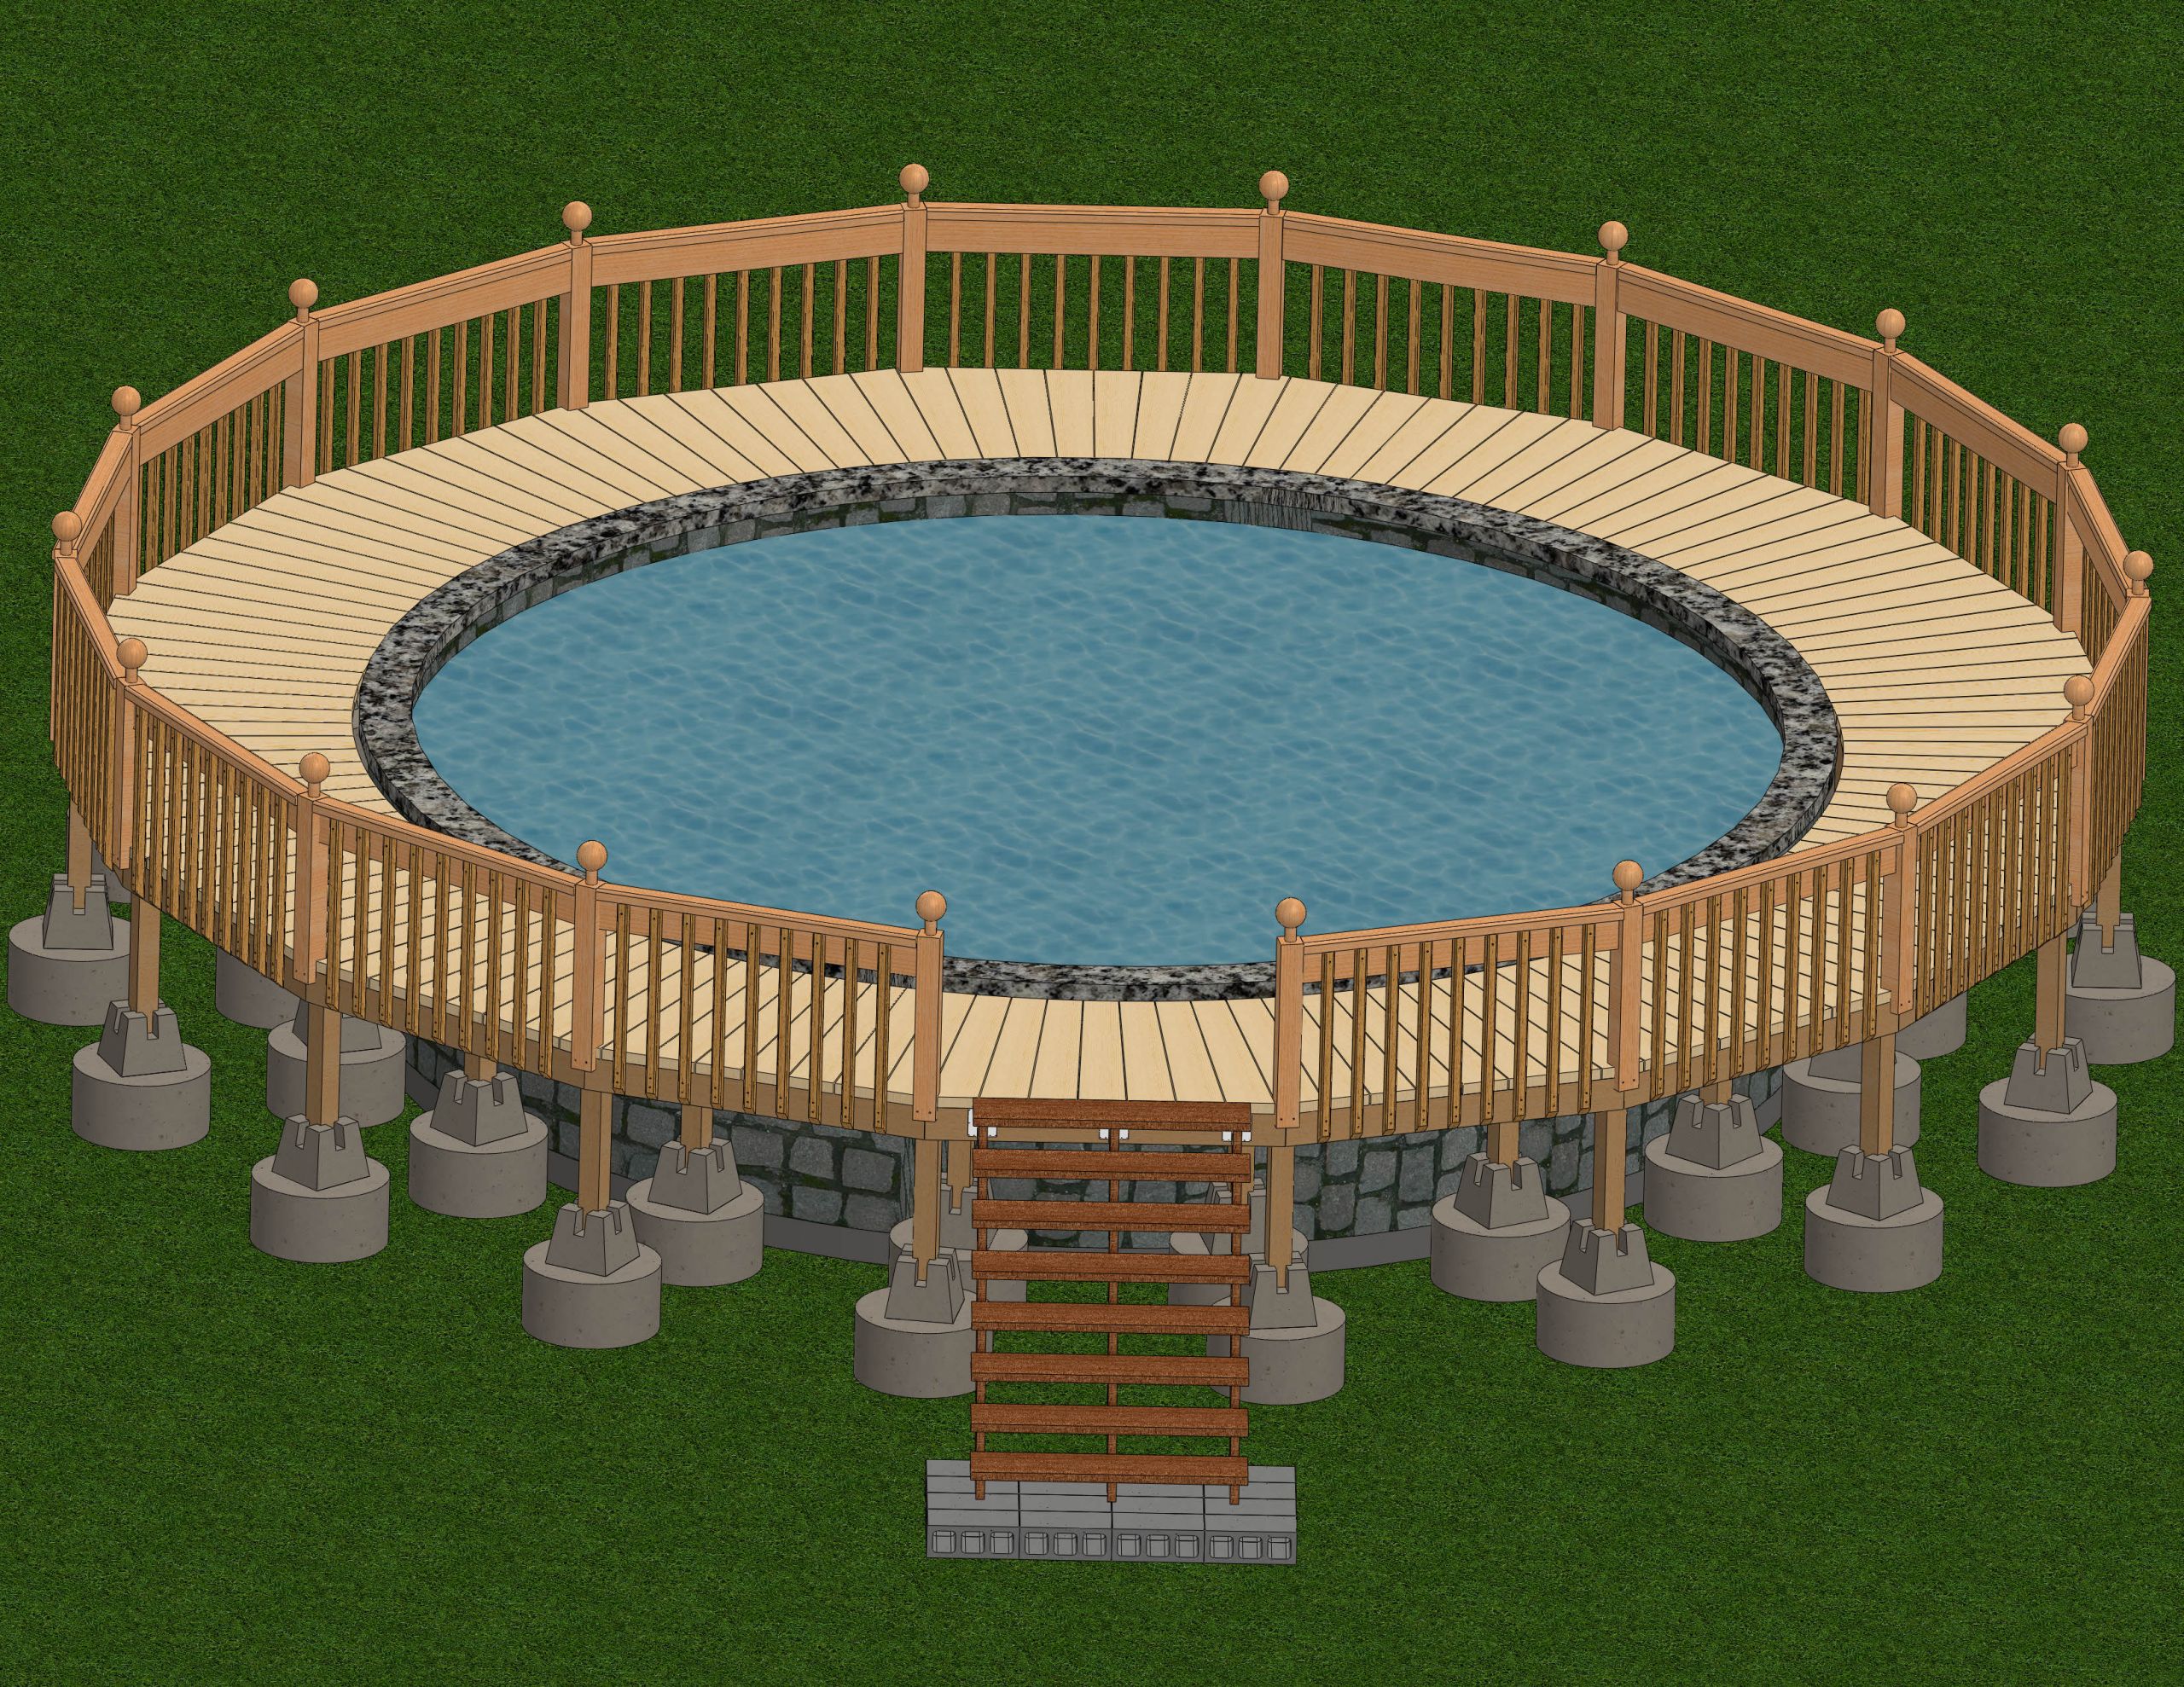 Above Ground Pool Deck
 How to Build a Deck Around an Ground Pool